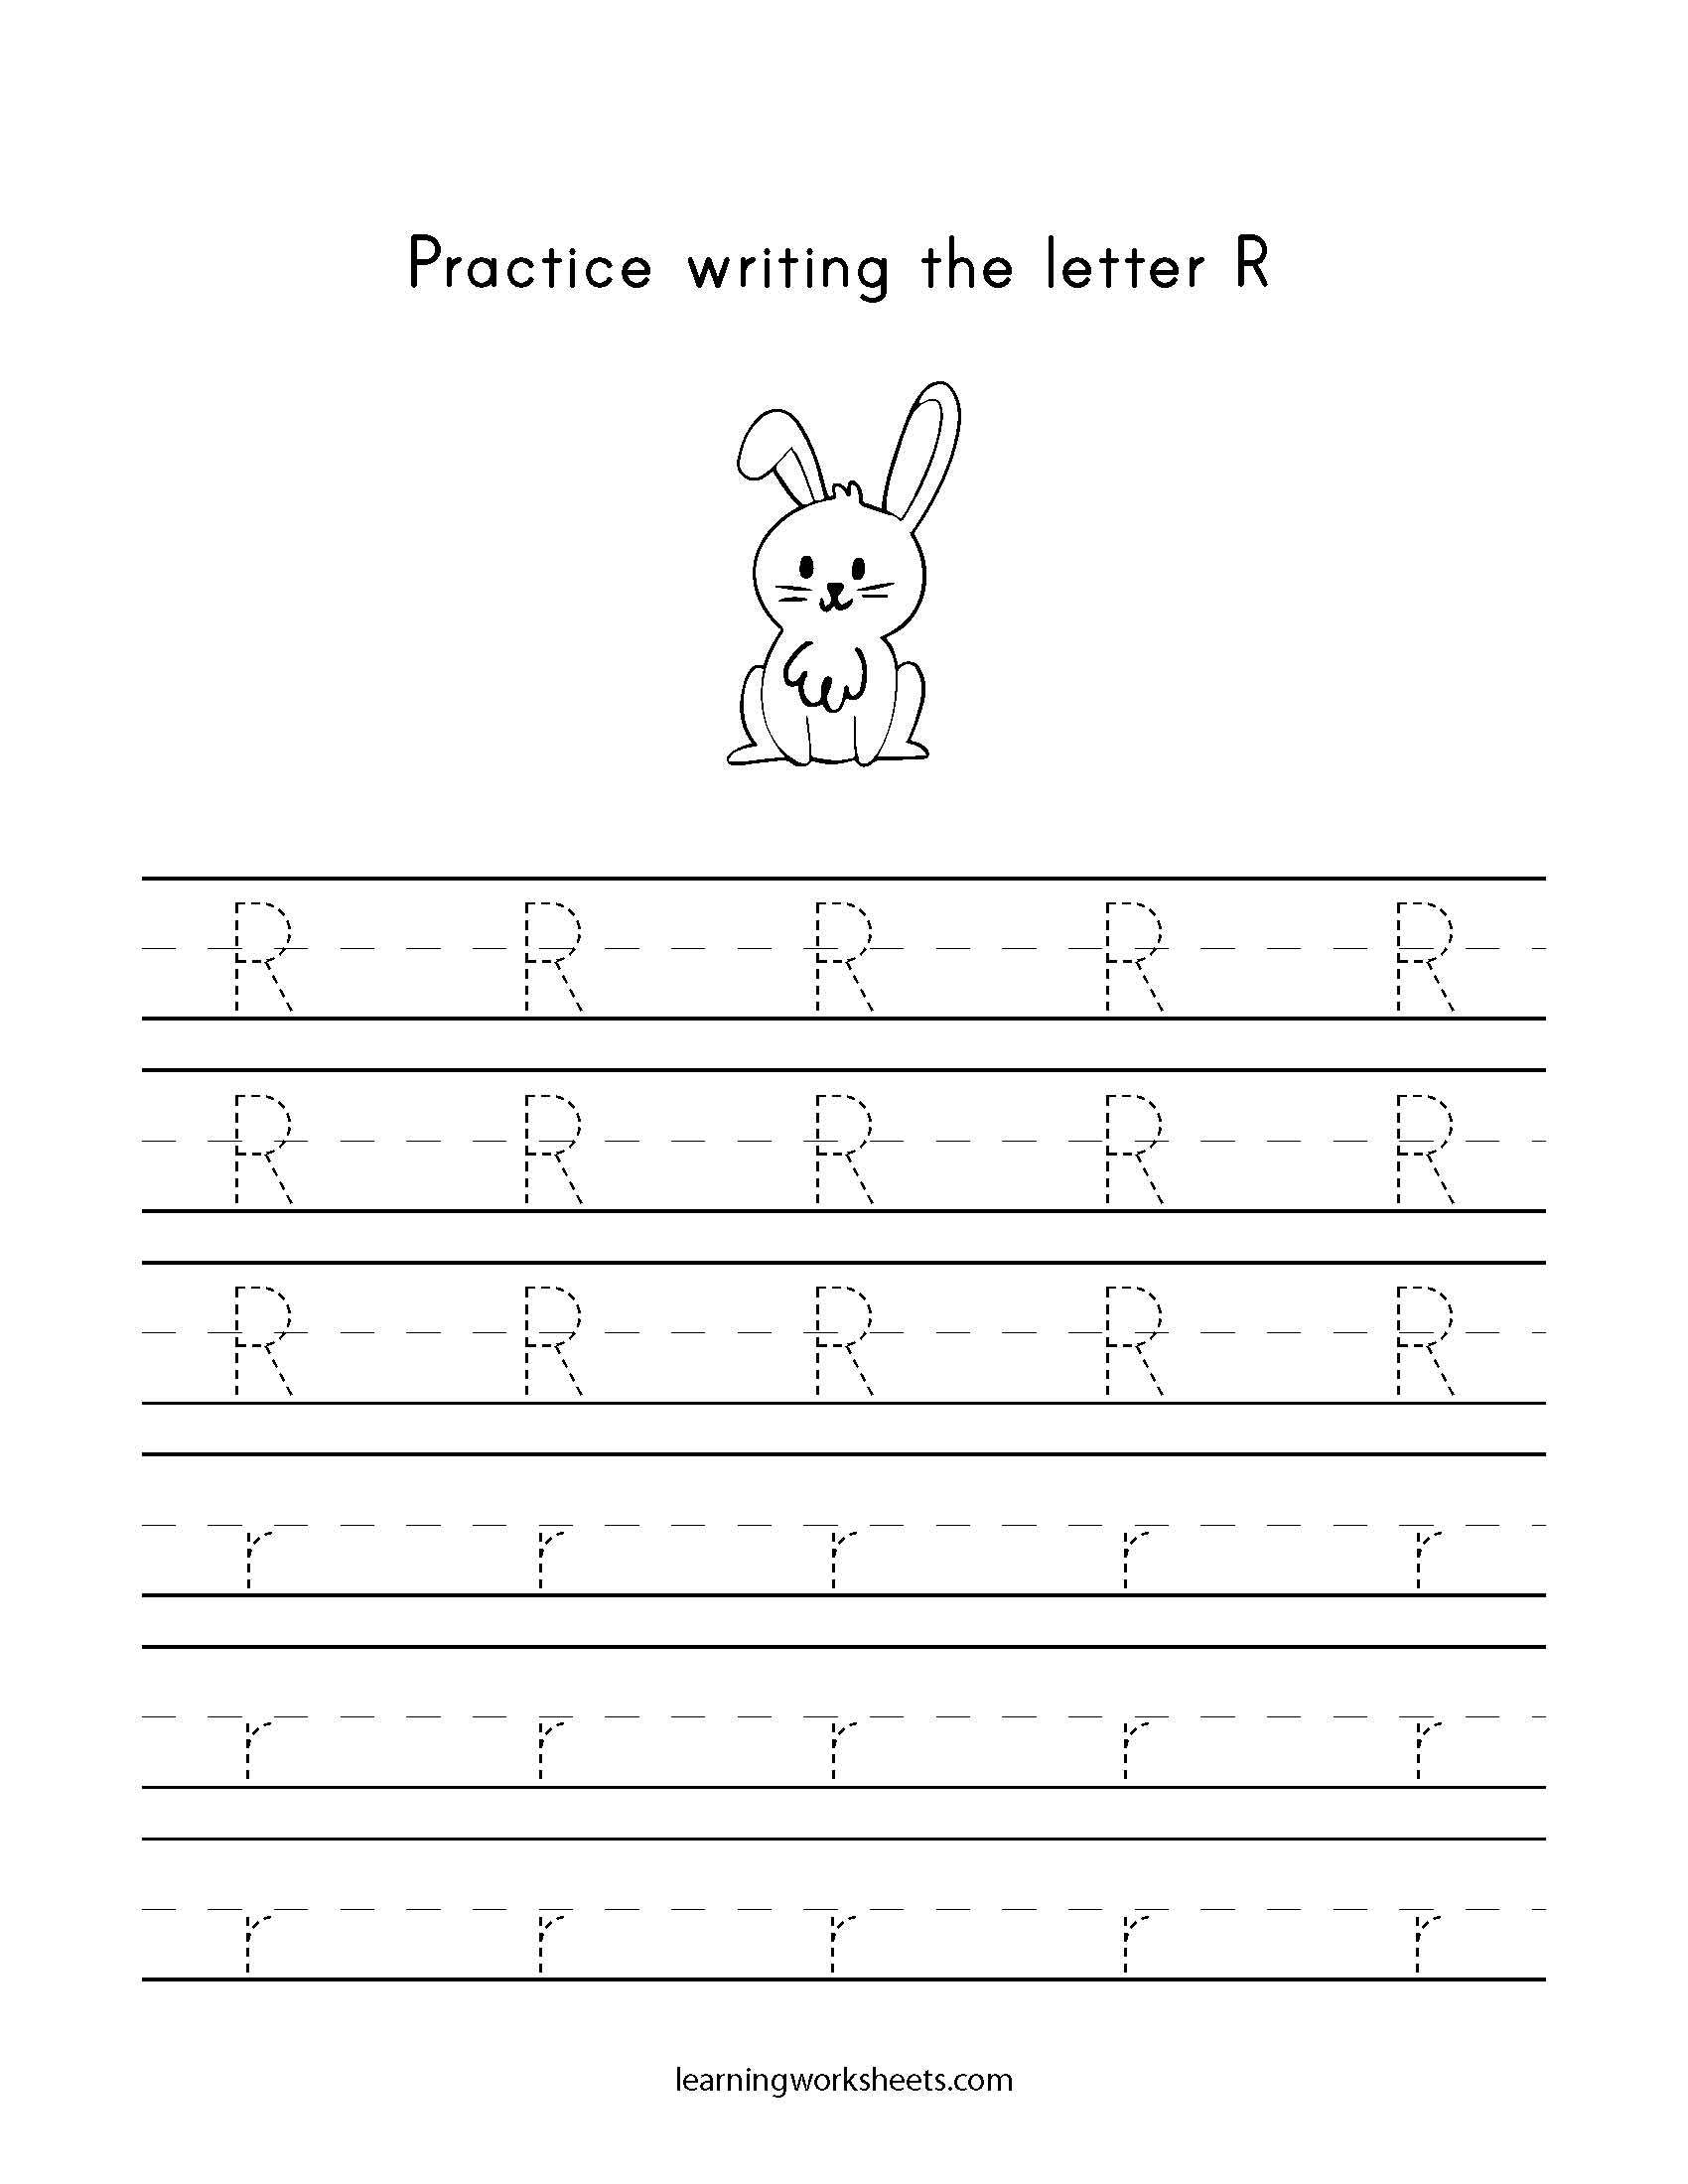 practice-writing-the-letter-r-learning-worksheets